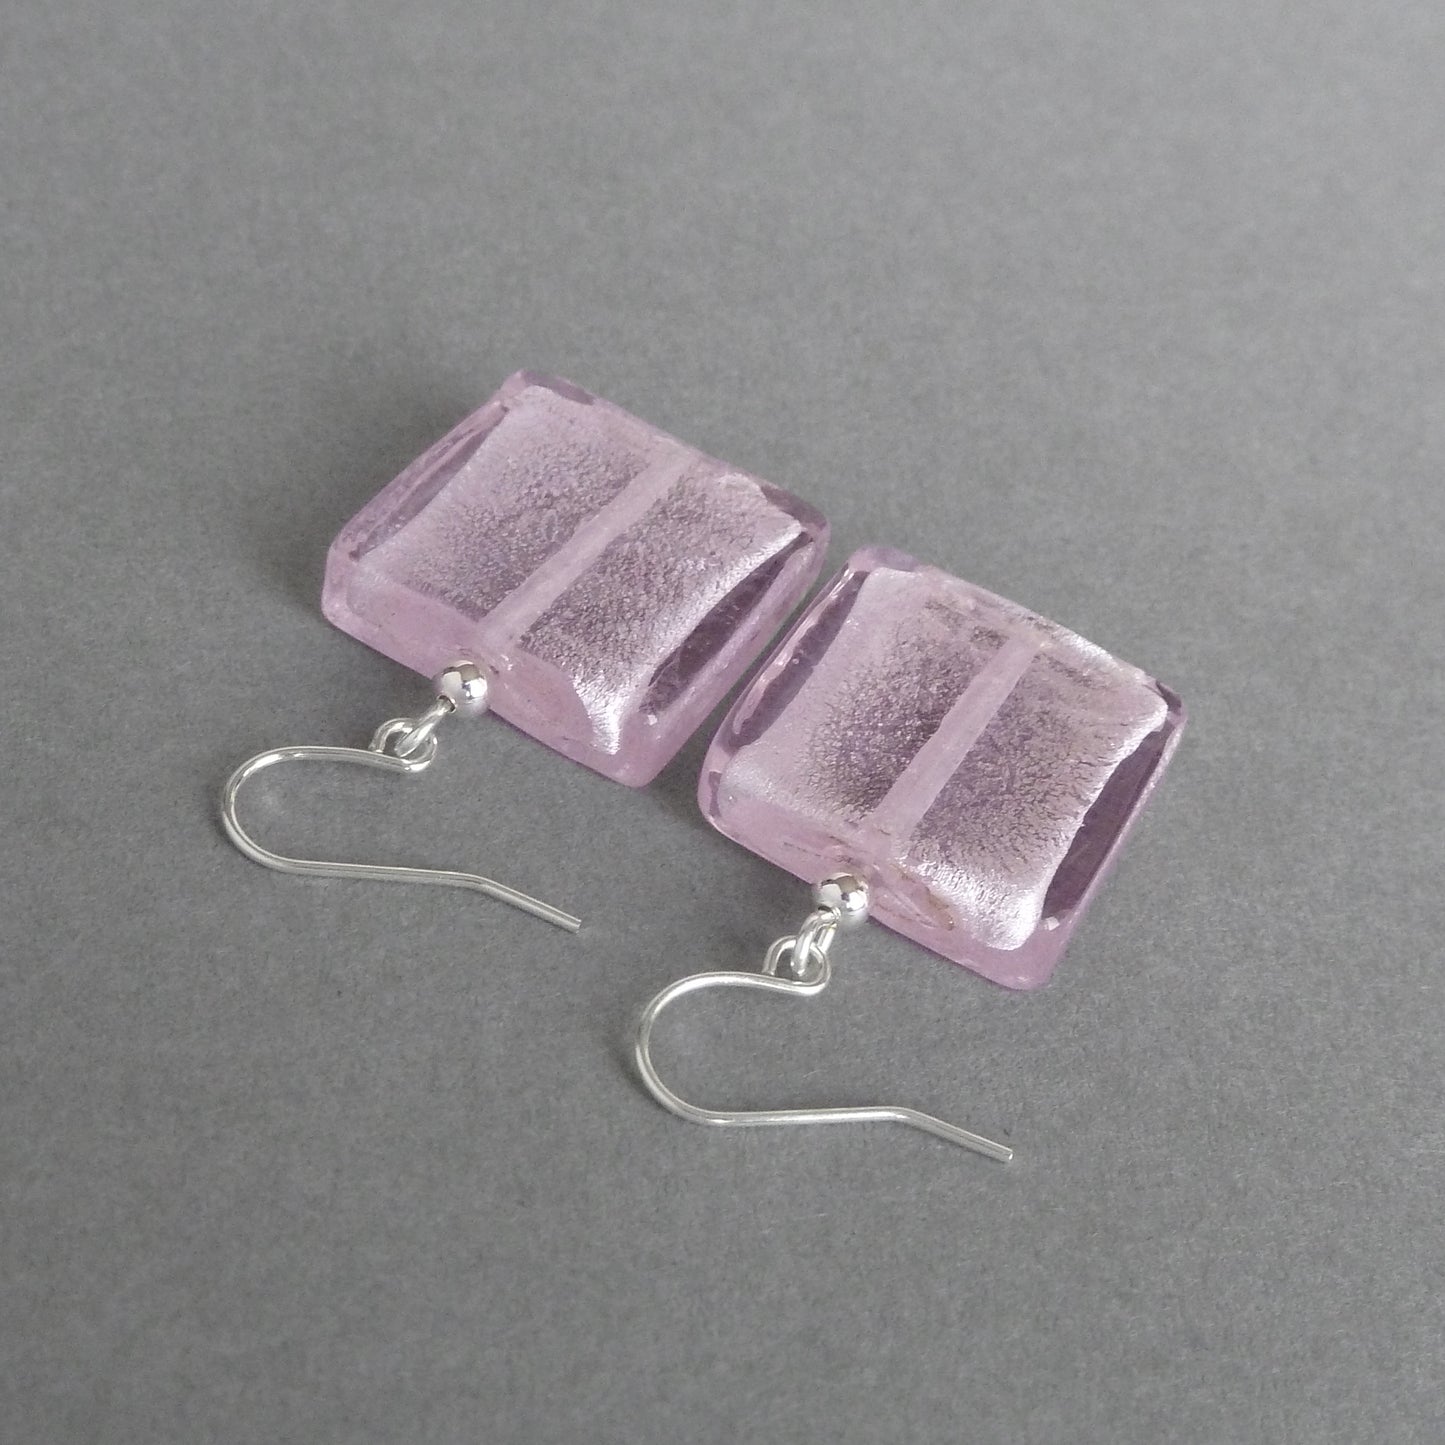 Square pink glass earrings